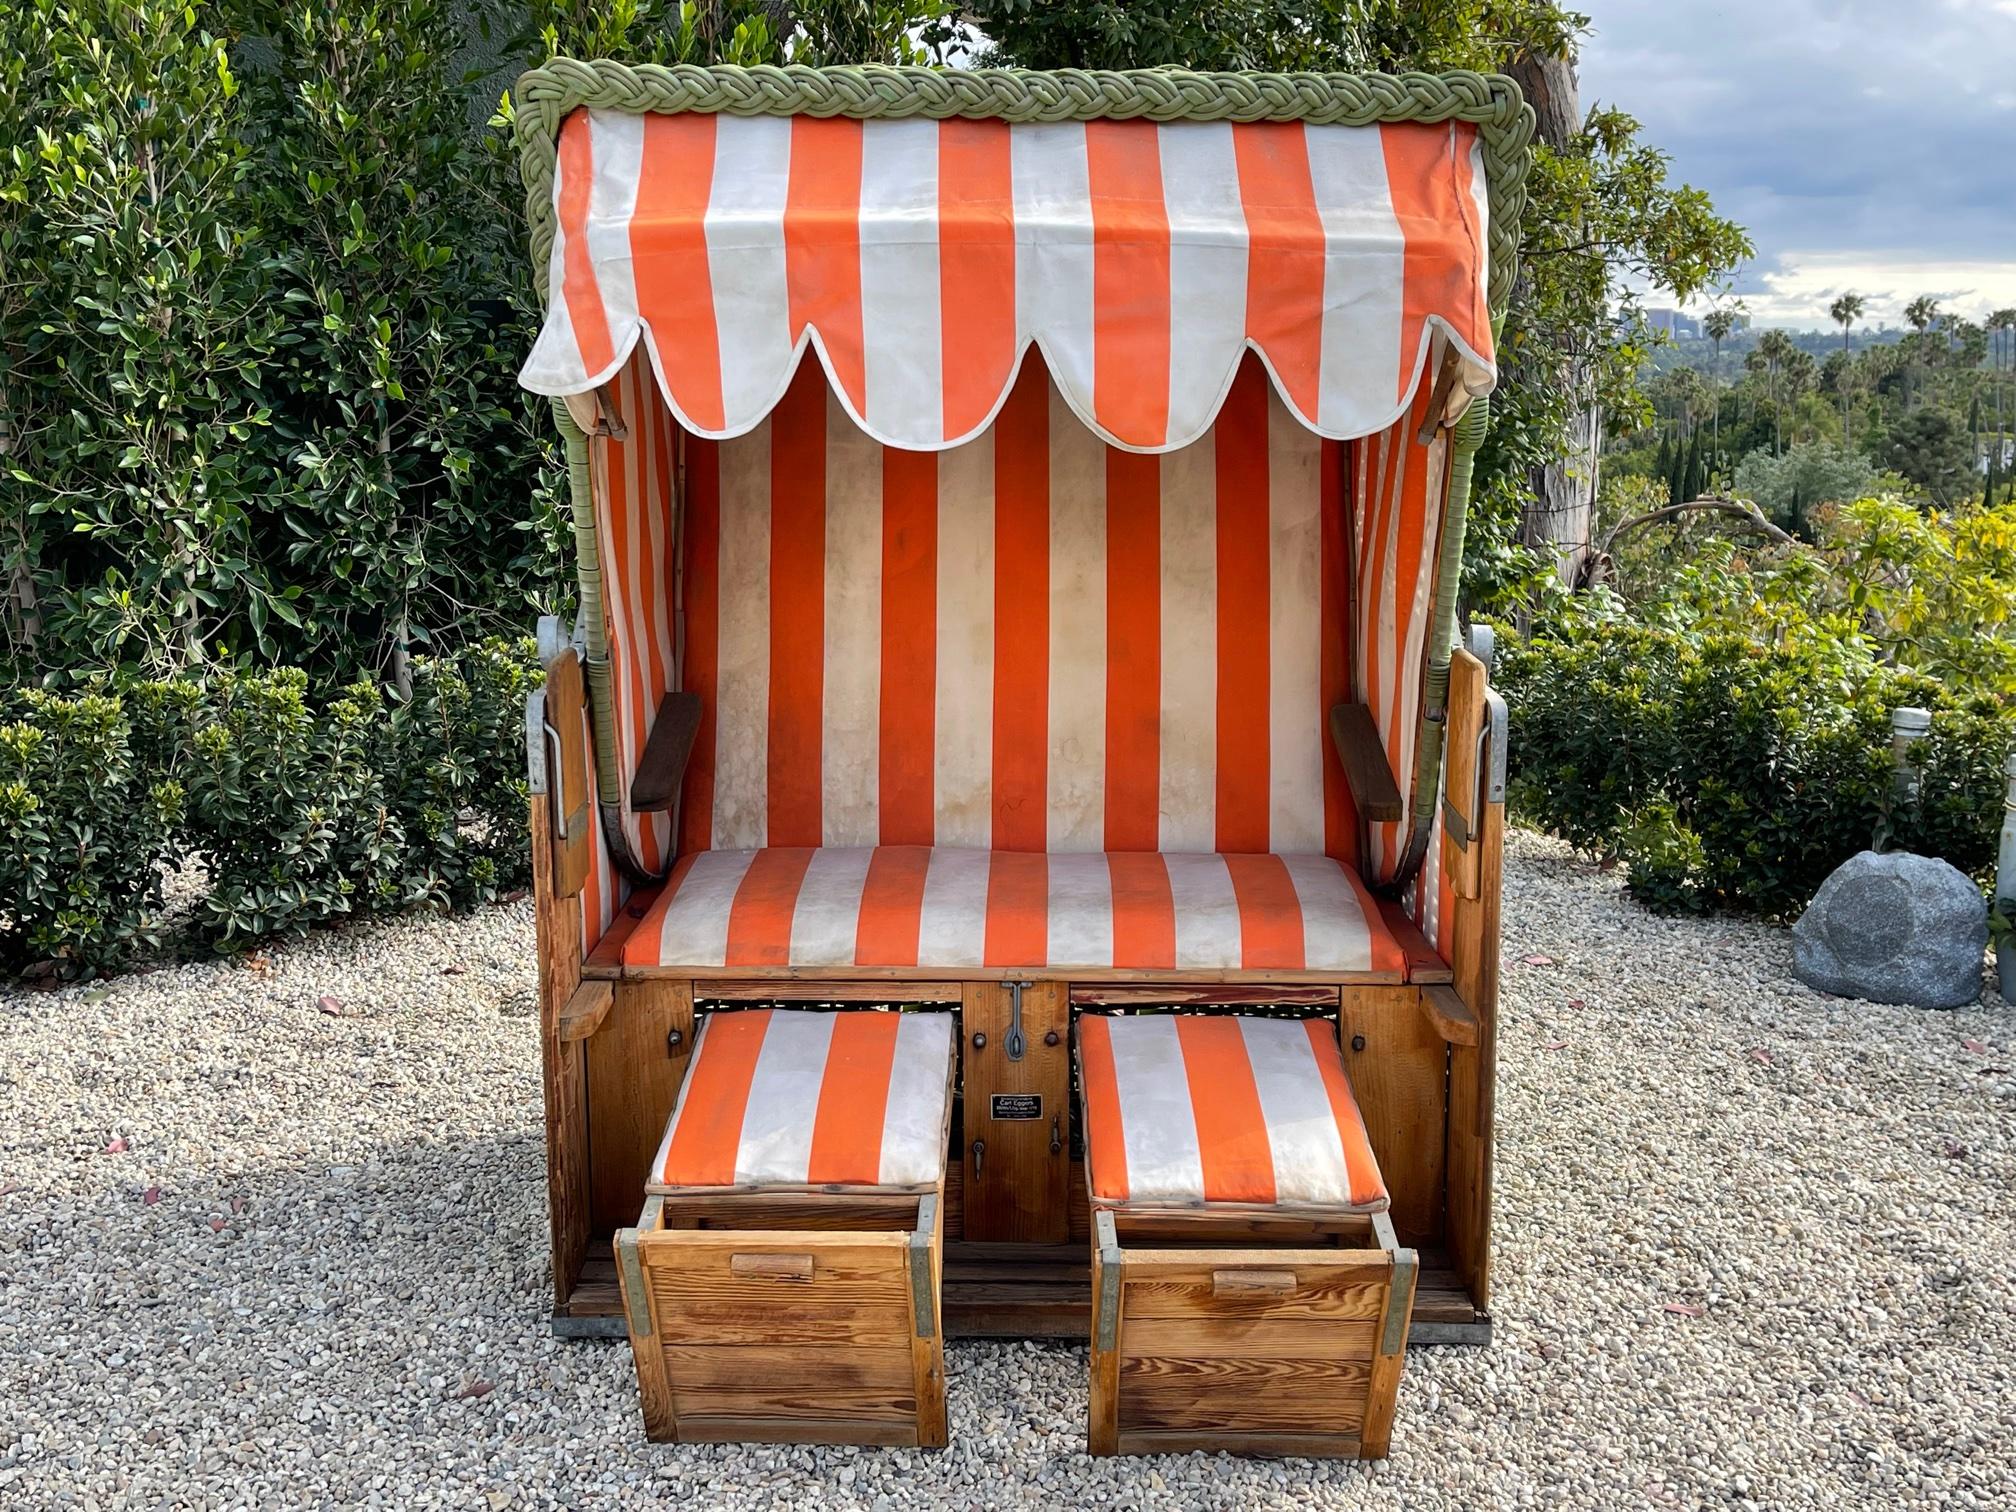 Incredible reclining deck chair / beach Cabana from the early 1900's
Original green woven wicker and striped fabric
Chair reclines and has pull out ottomans
Drink trays that pop up from the side
Great historic piece from the Italian Riviera at the